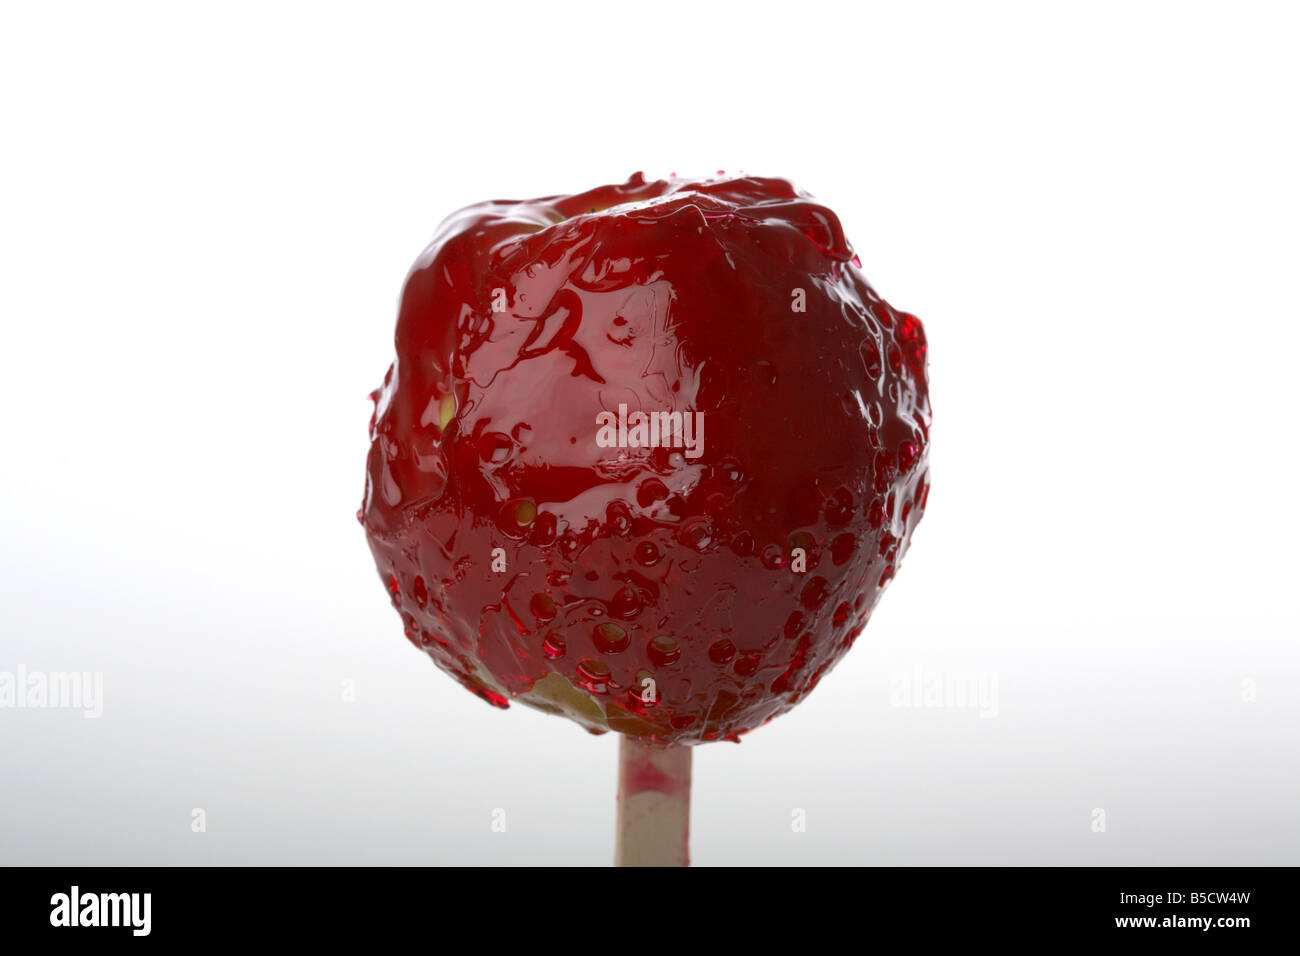 candy apple covered in dripping red candy traditionally eaten in ireland at Halloween Stock Photo